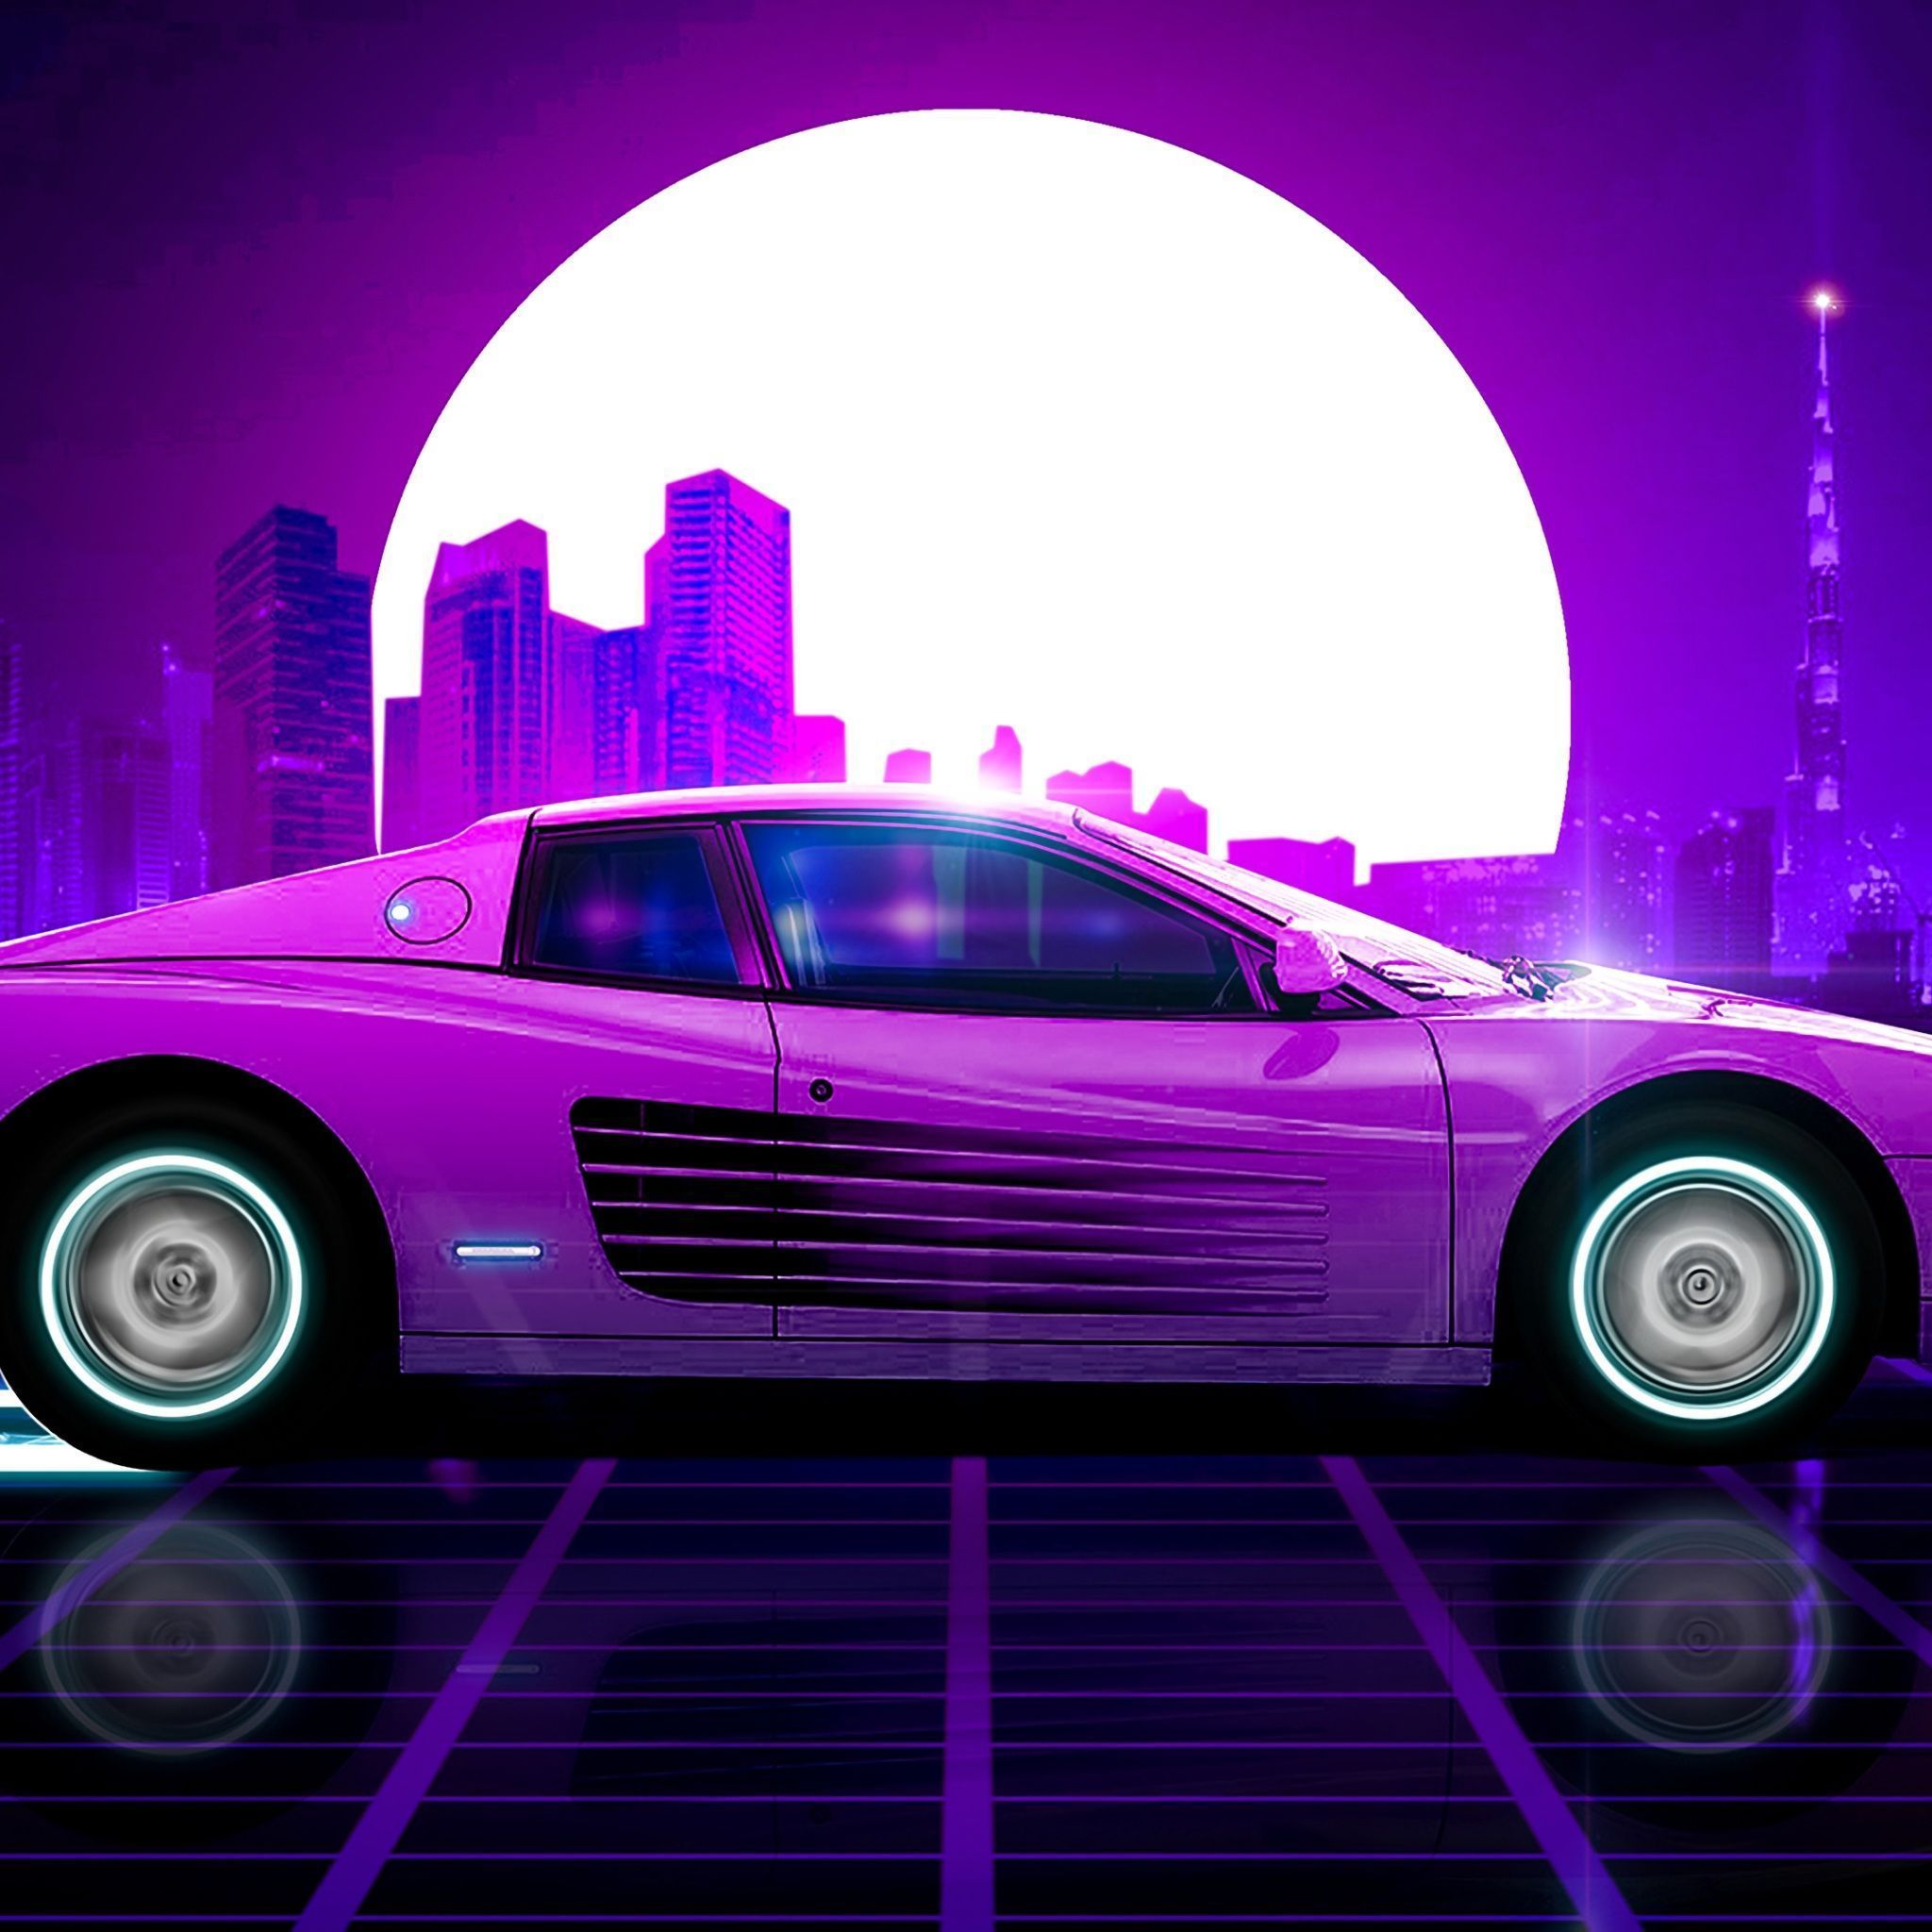 A car with a purple neon aesthetic - Synthwave